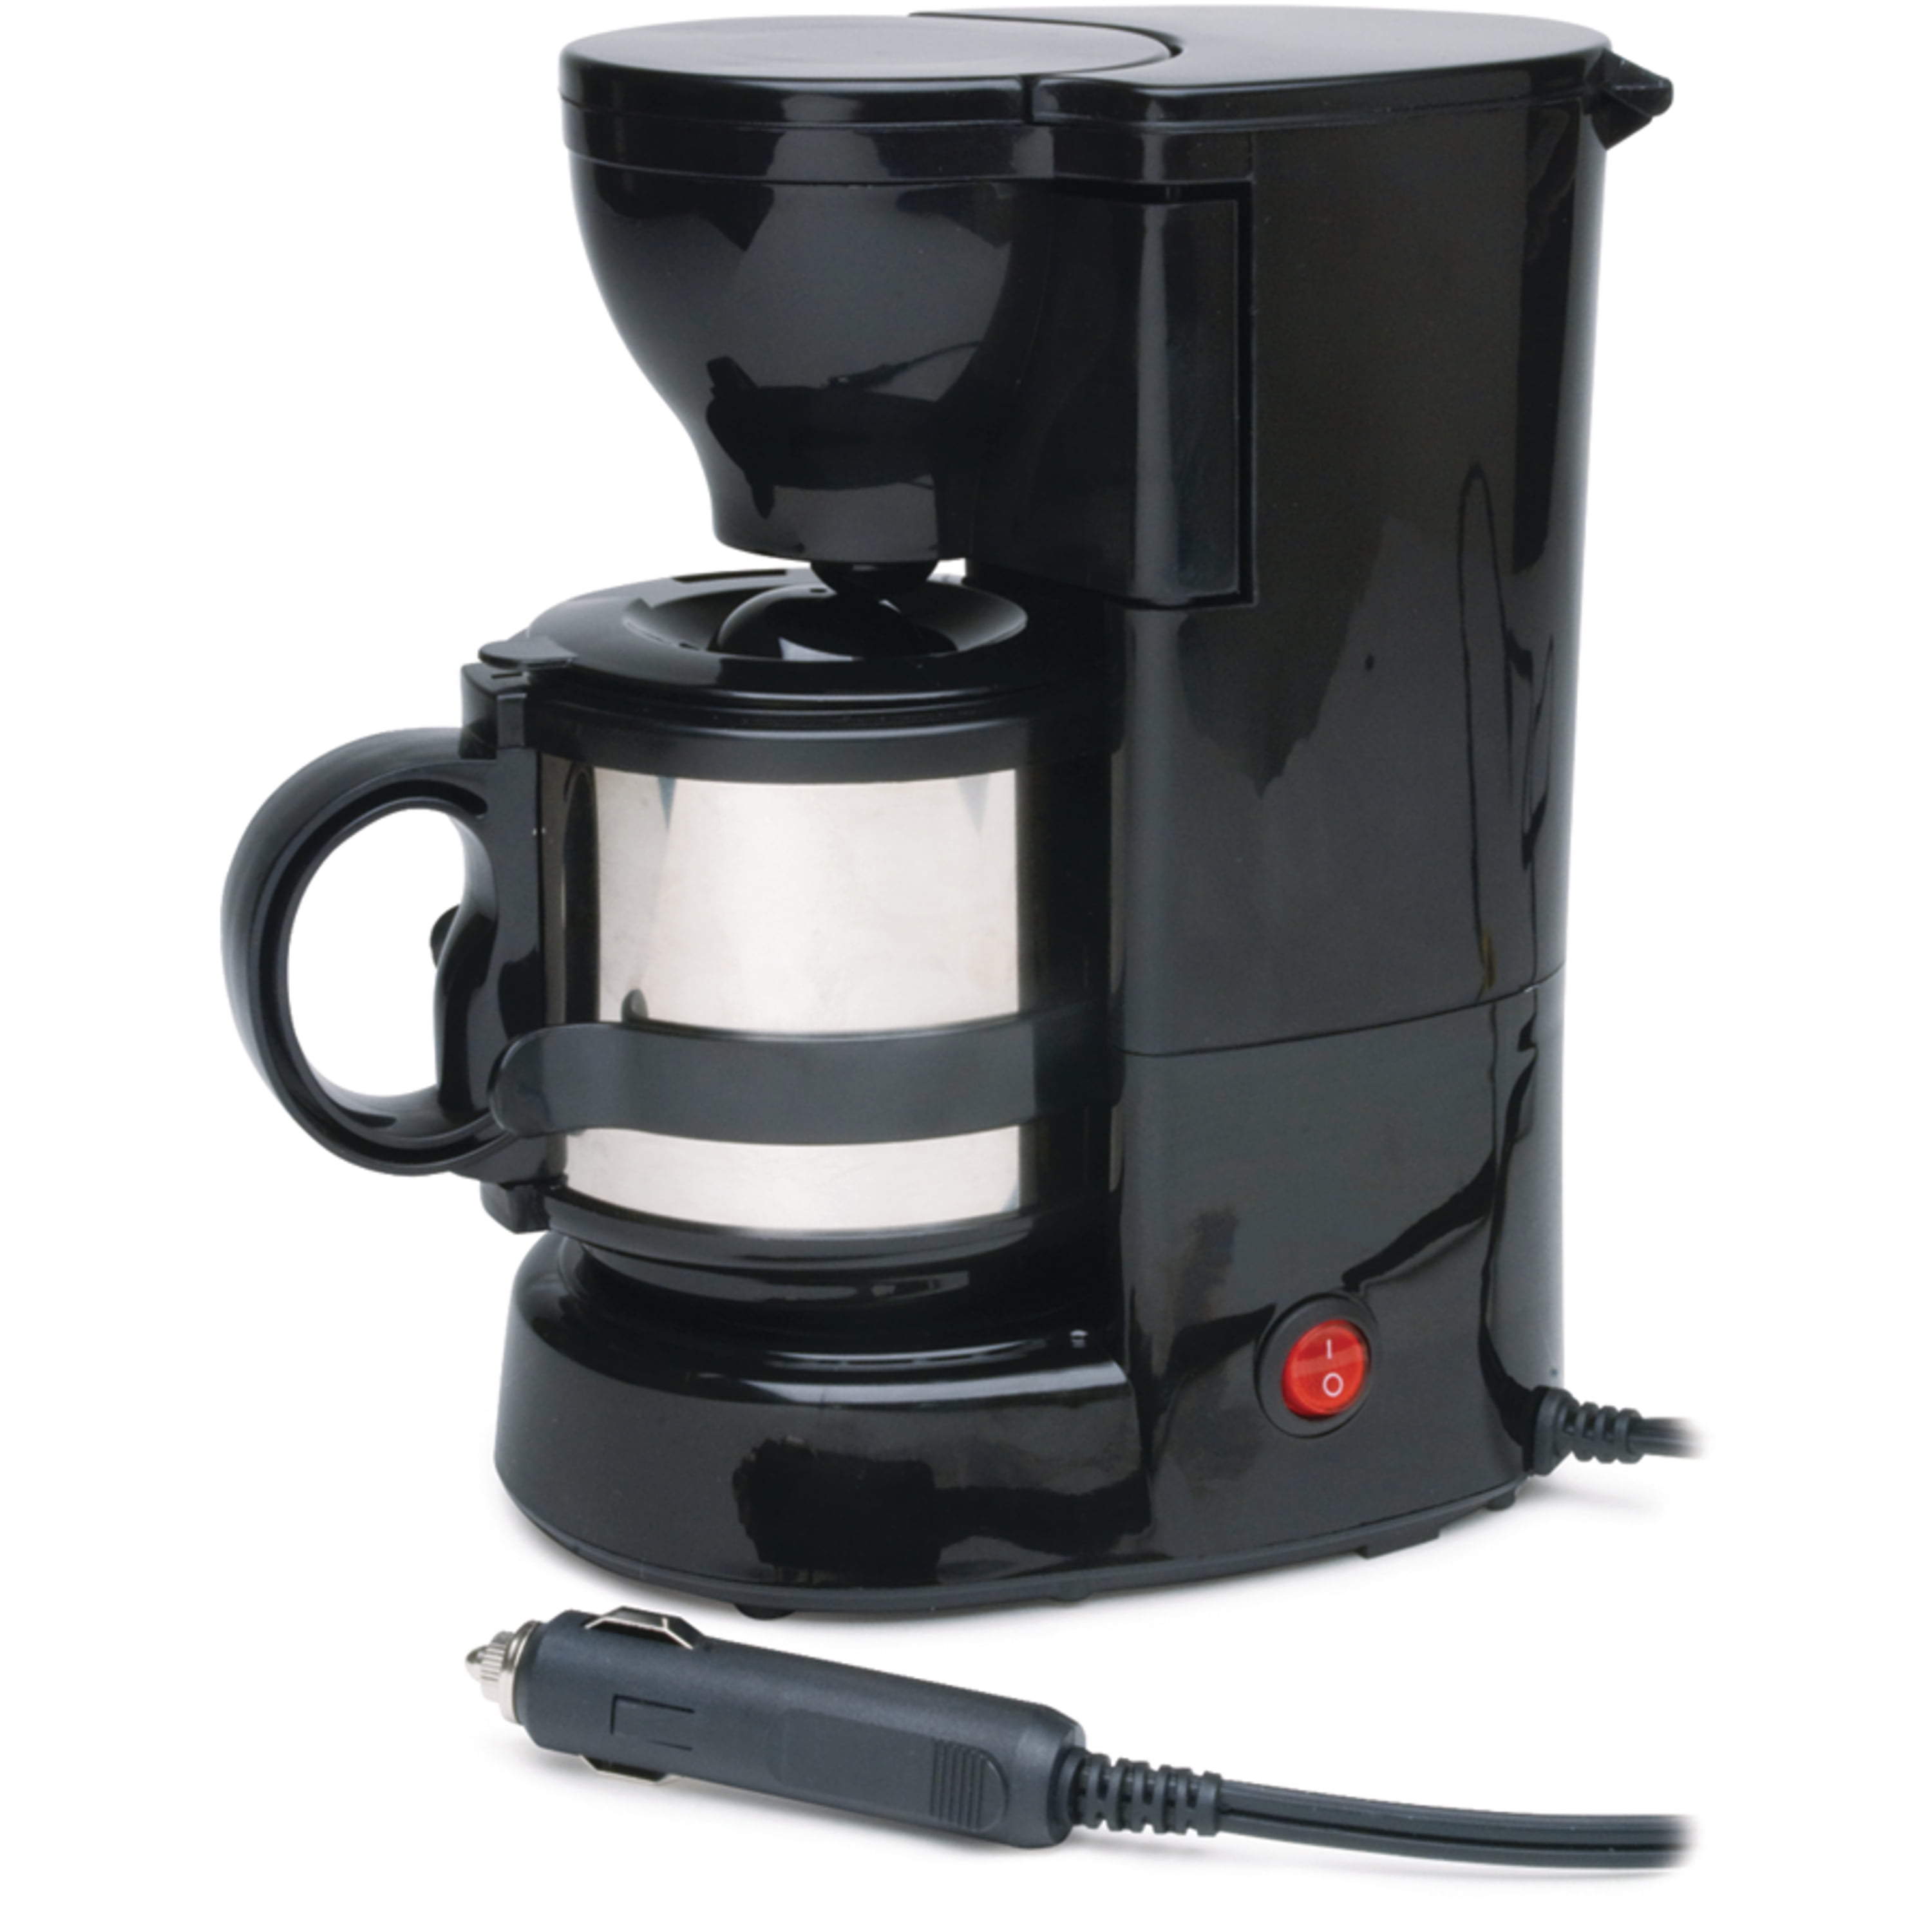 RoadPro RPSC784 12V 15A Quick-Cup RV Coffee Maker